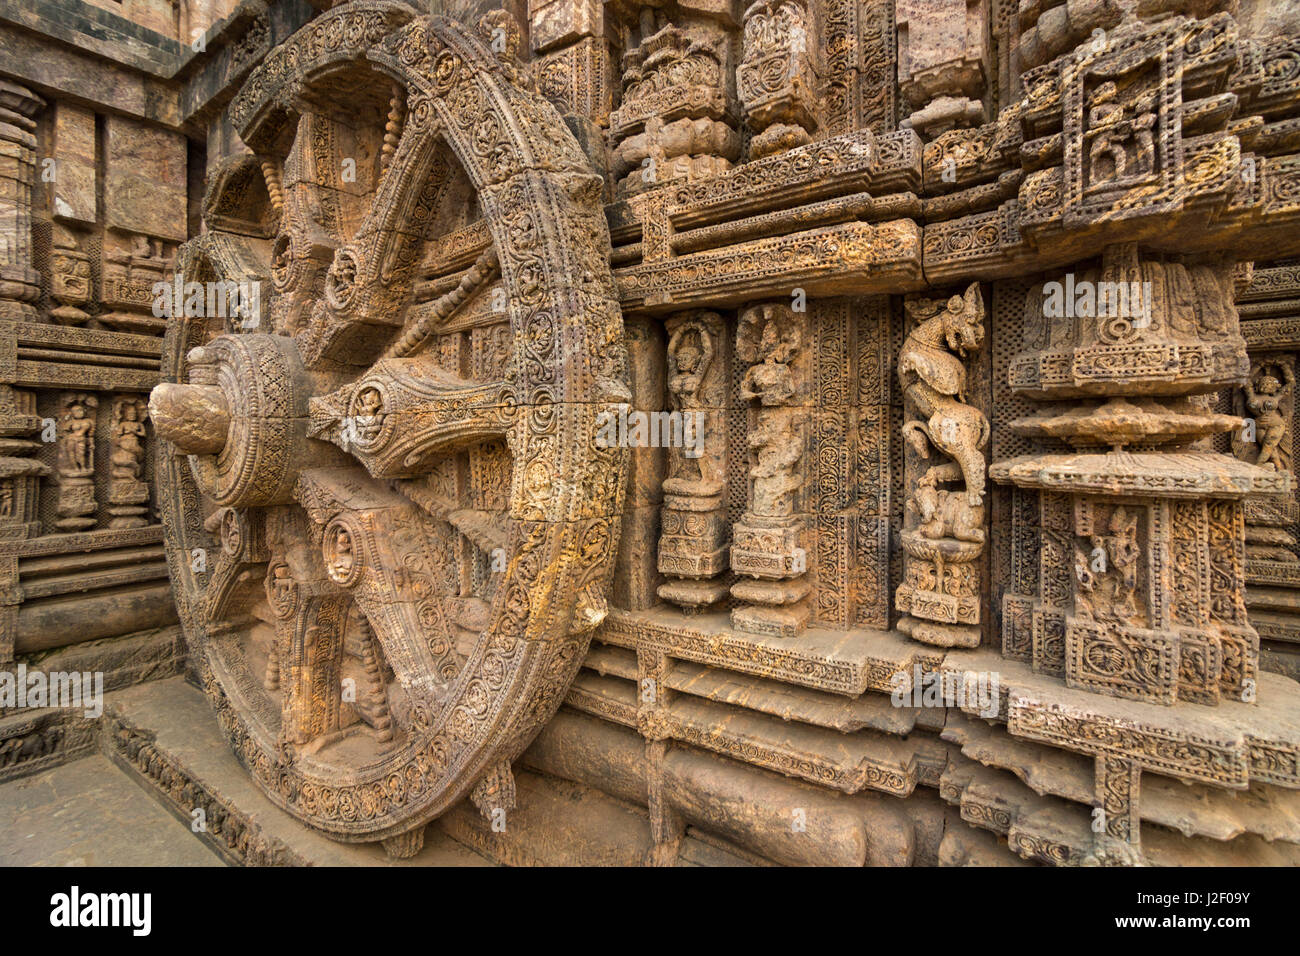 One of wheels of the chariot design of Konark temple Stock Photo